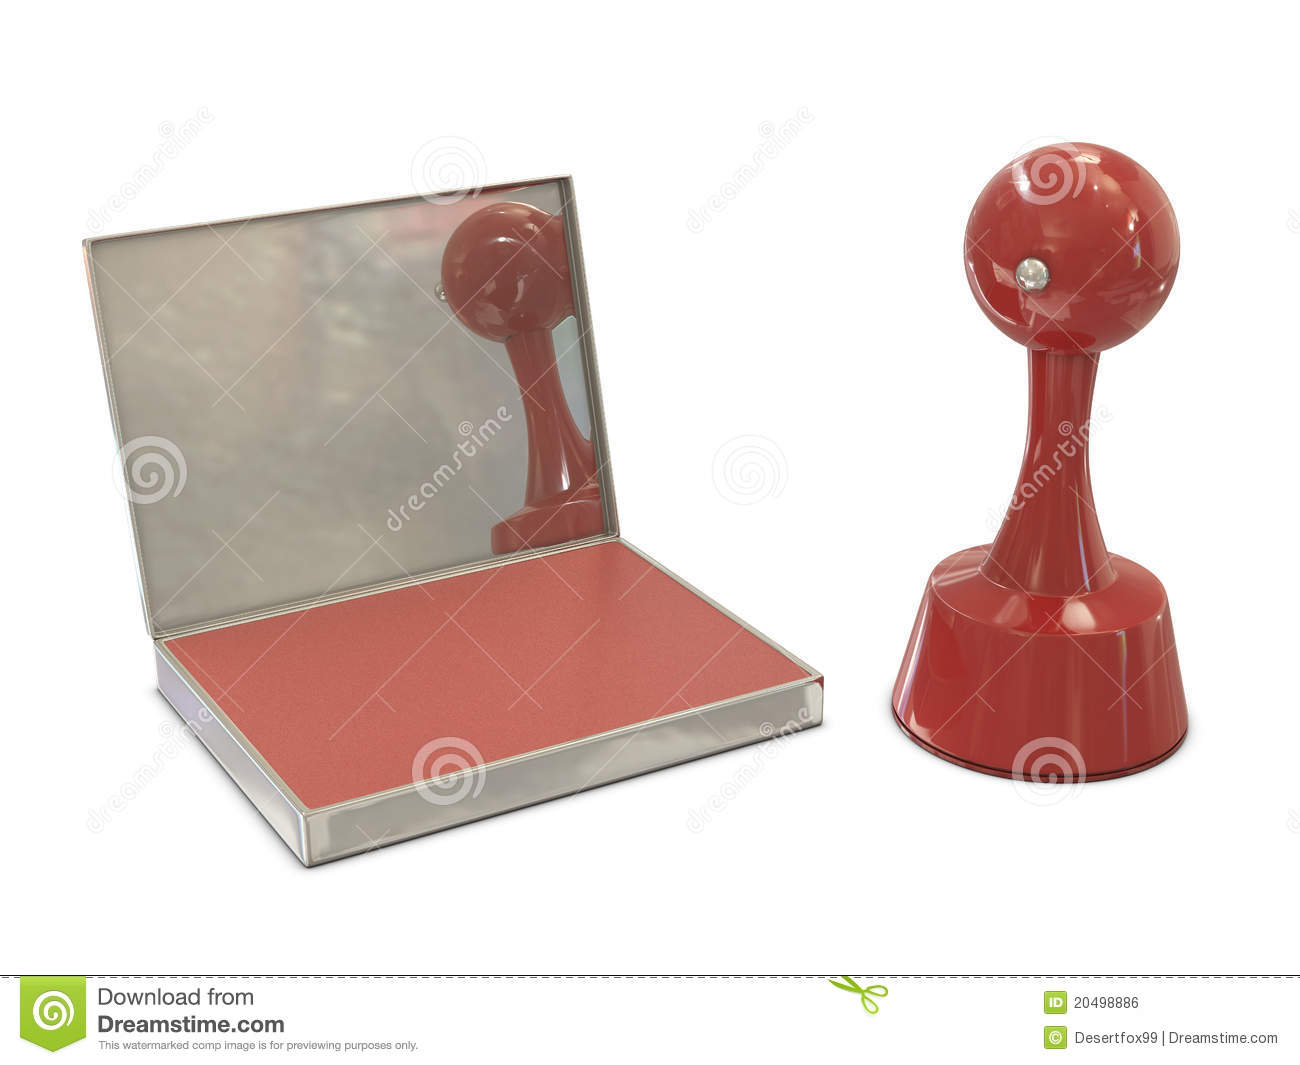 Stamper Red Cylindrical With Ink Pad Royalty Free Stock Image   Image    